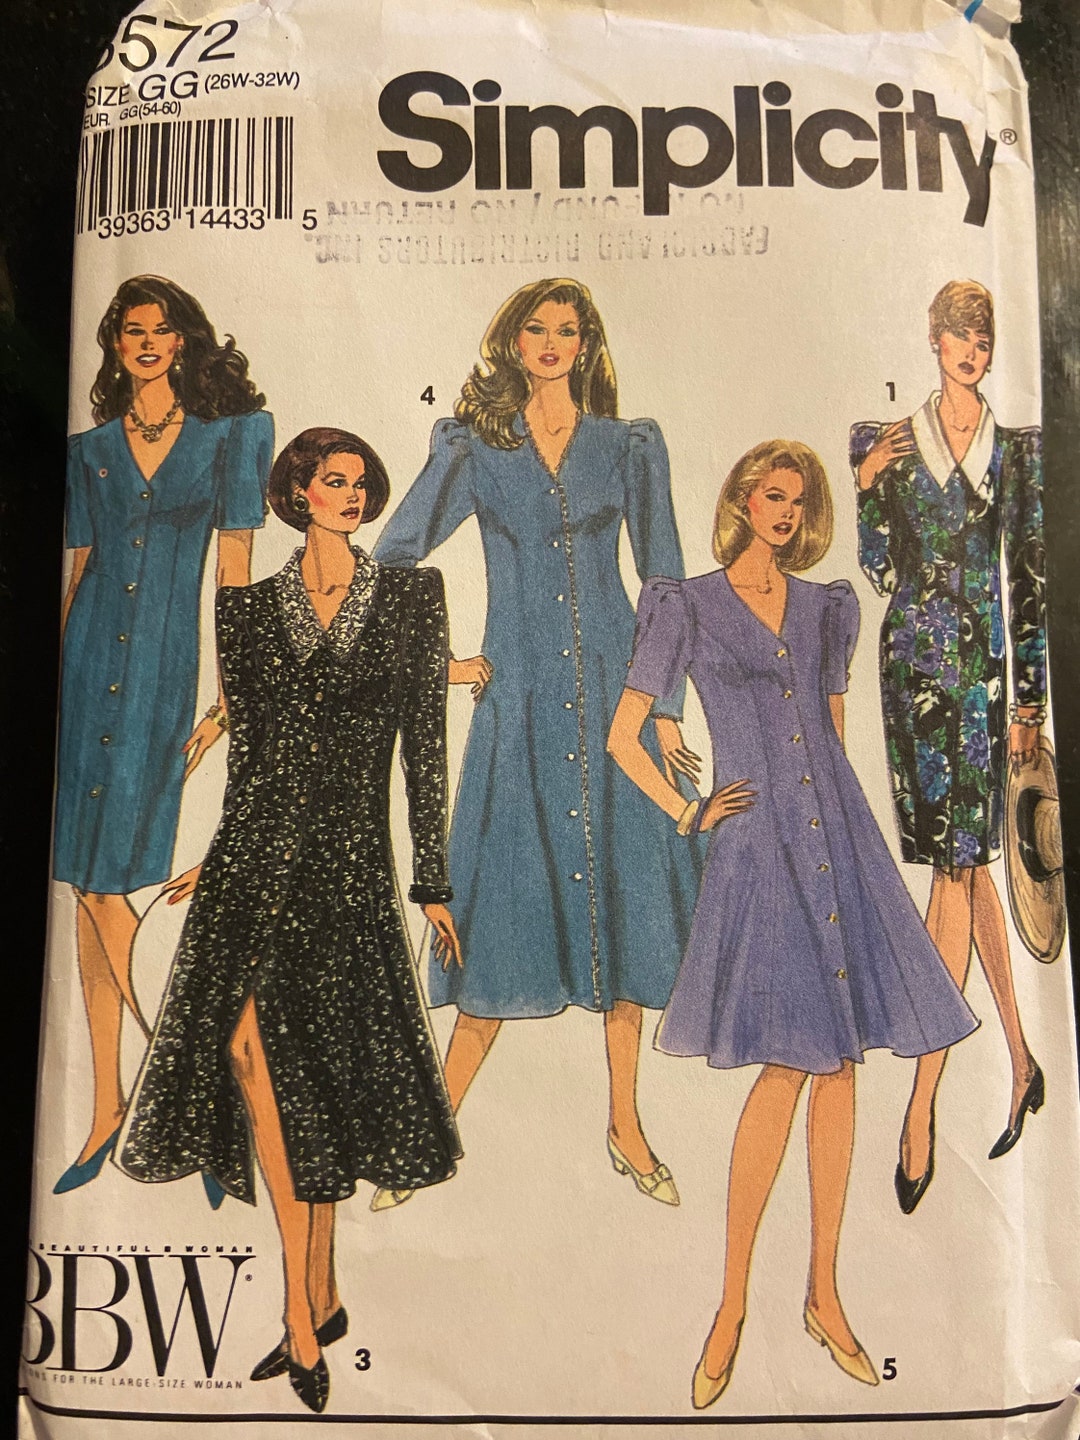 Simplicity Sewing Pattern 3572 Size 26w-32w - Etsy